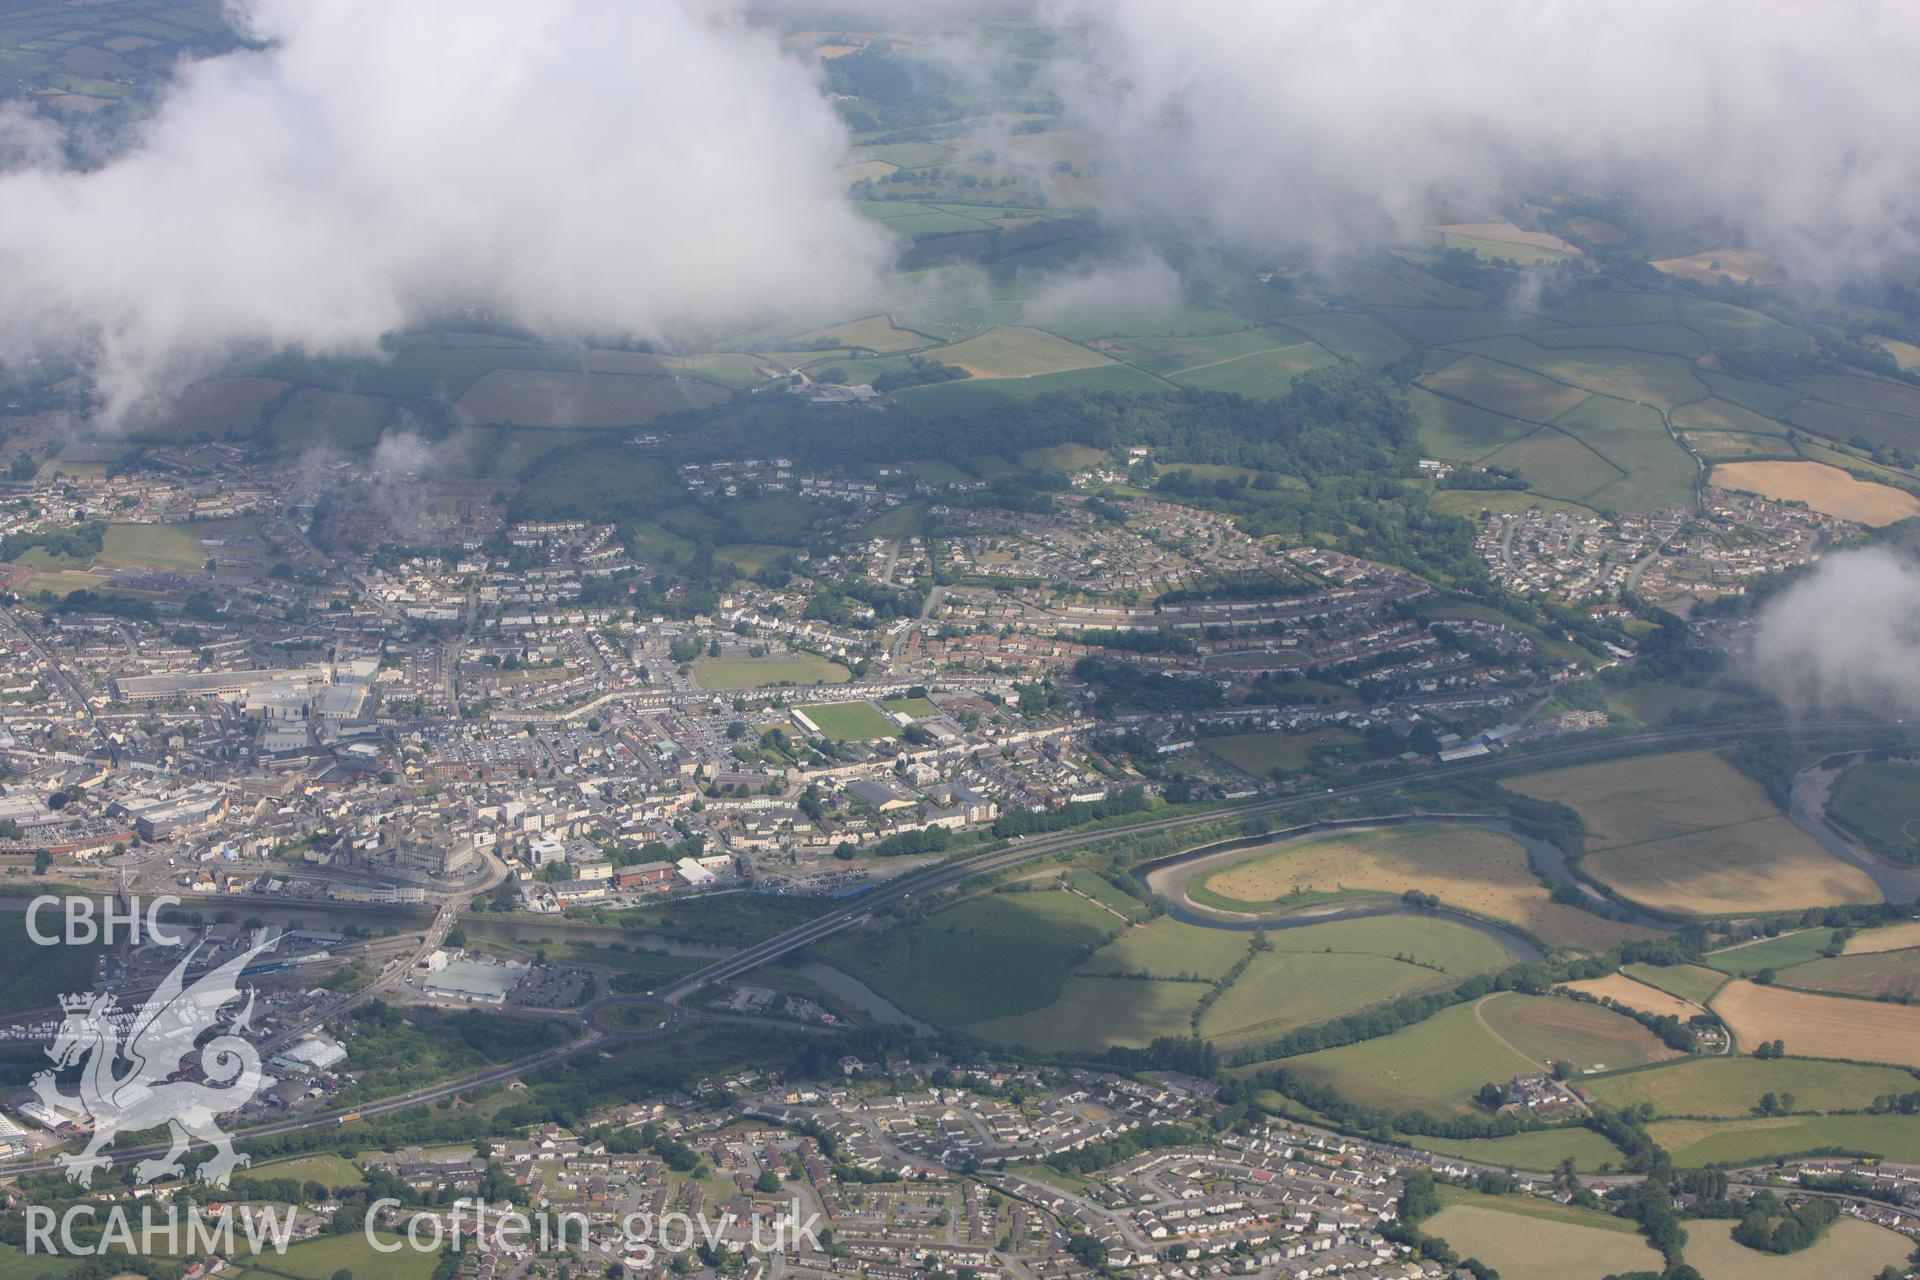 RCAHMW colour oblique photograph of Carmarthen, from the south-east. Taken by Toby Driver on 22/06/2010.